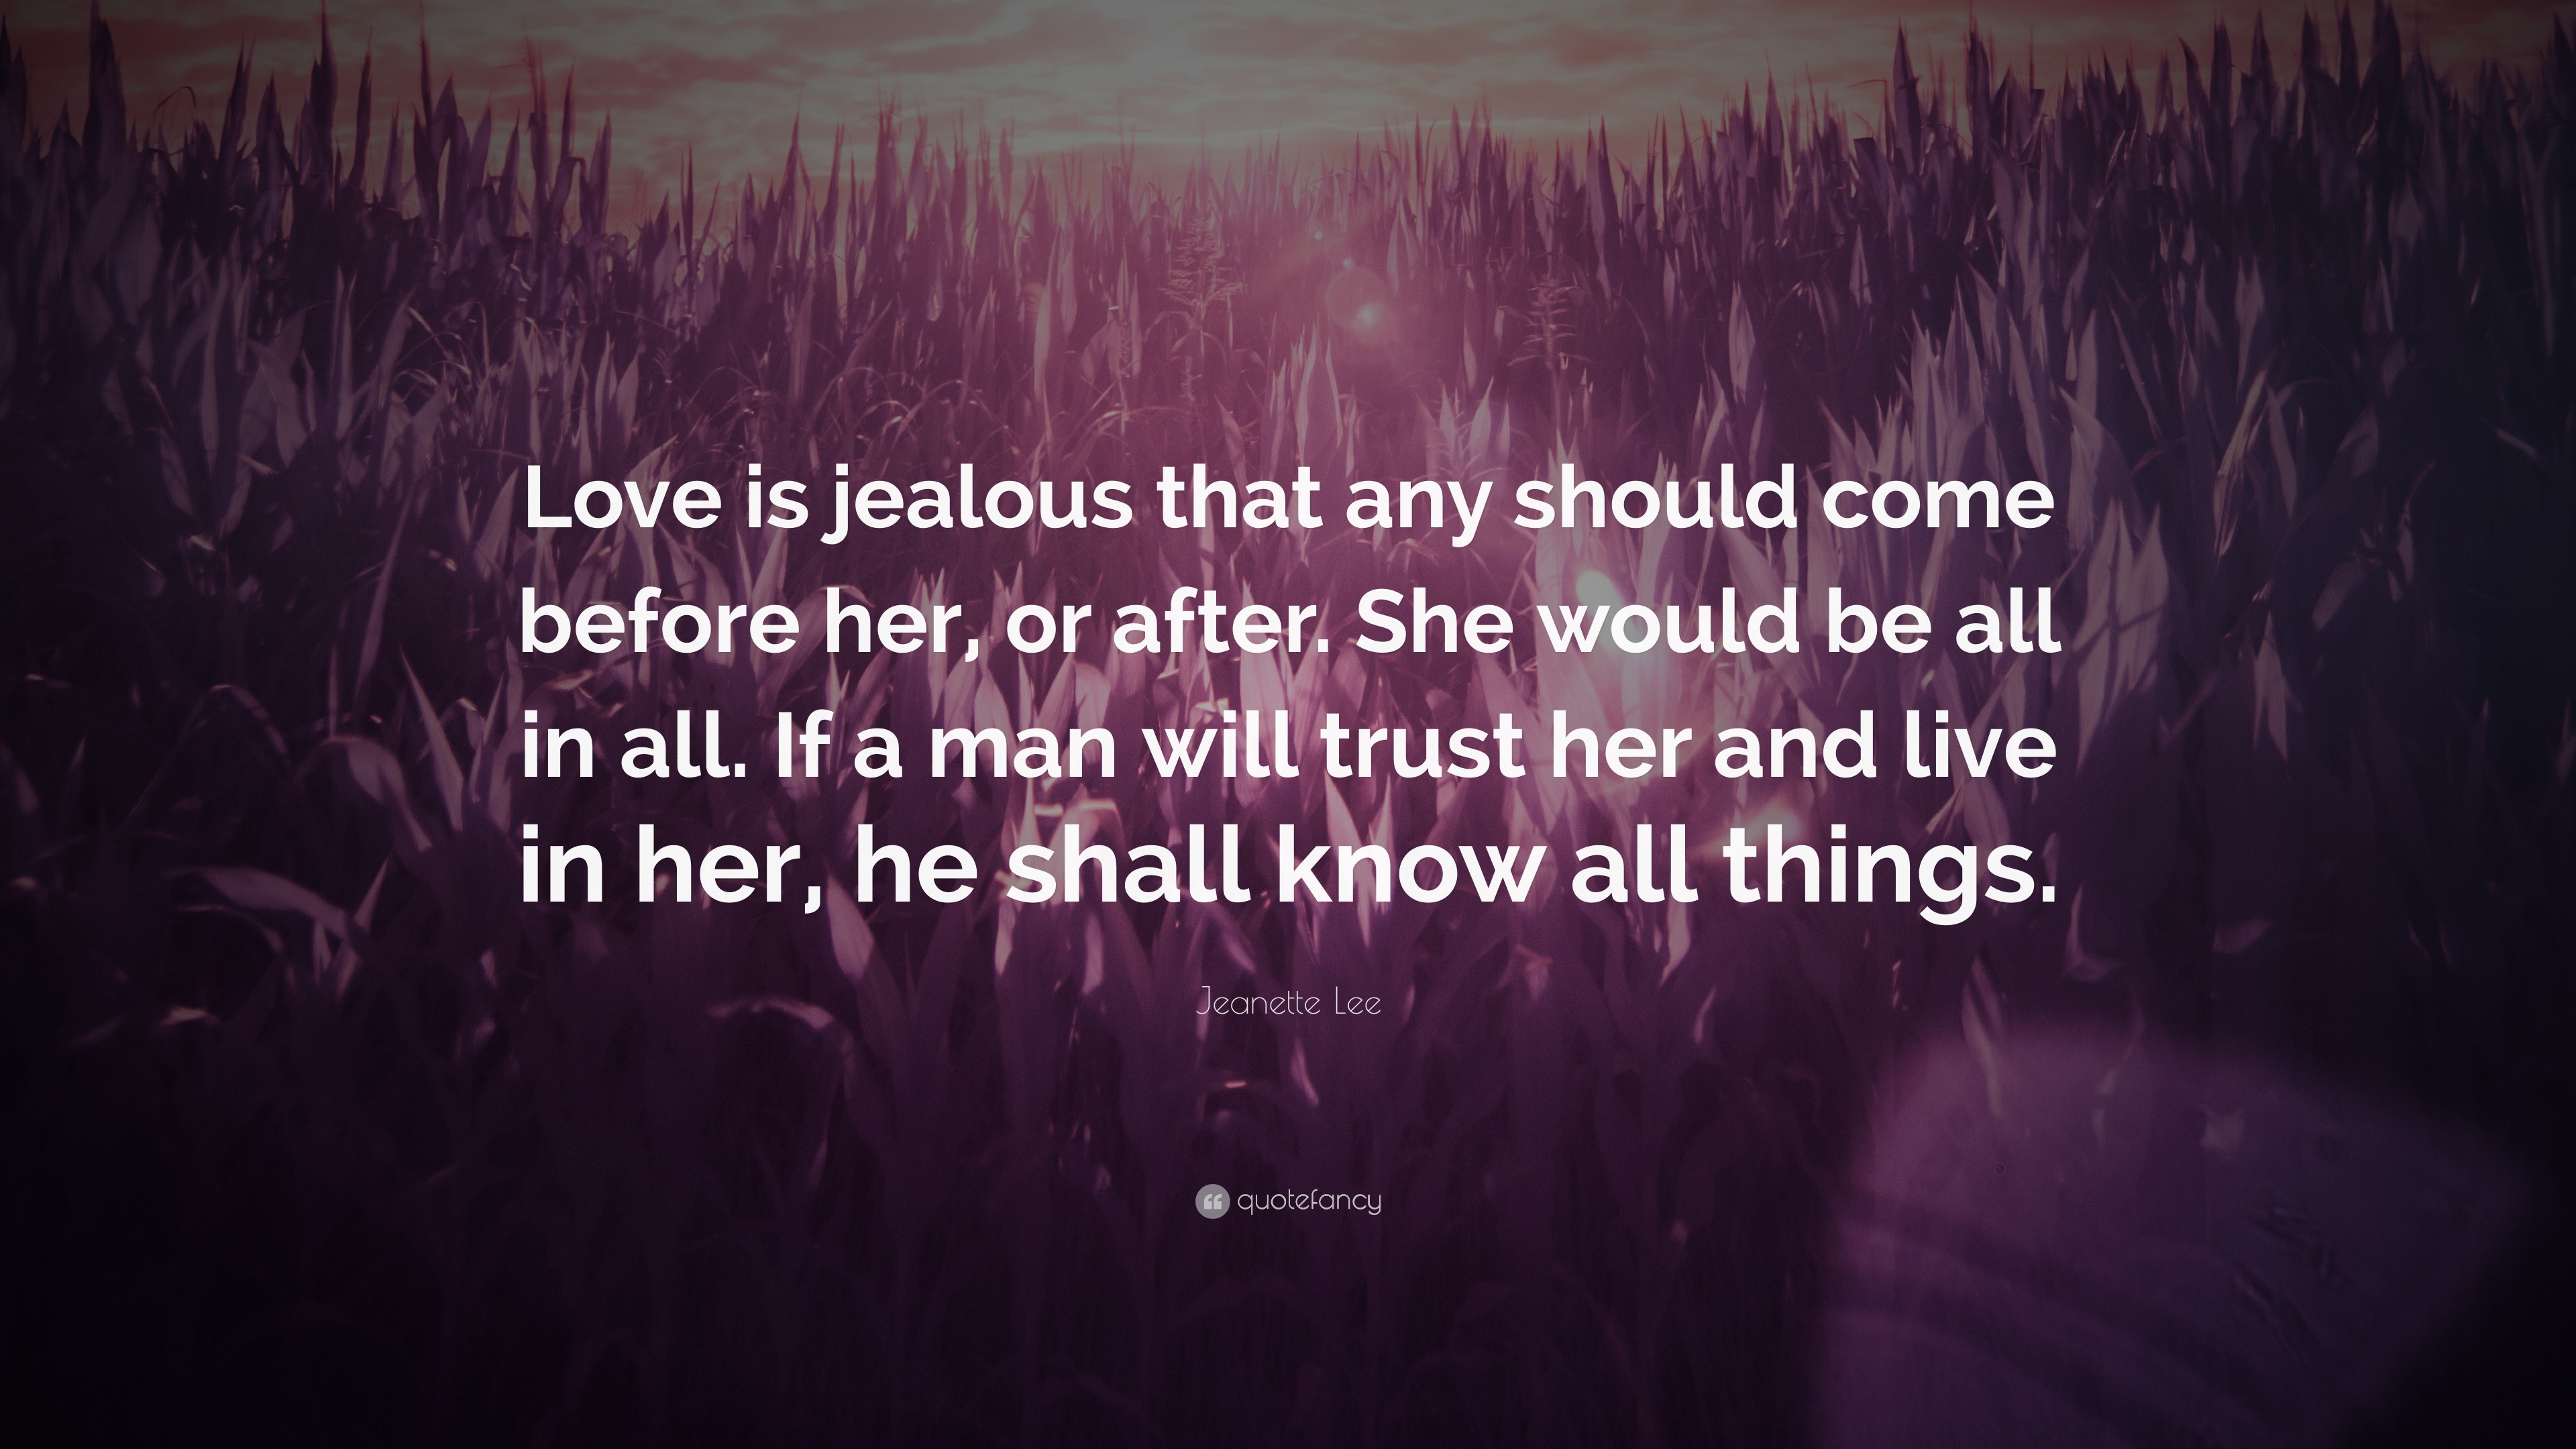 Jeanette Lee Quote: “Love is jealous that any should come before her ...